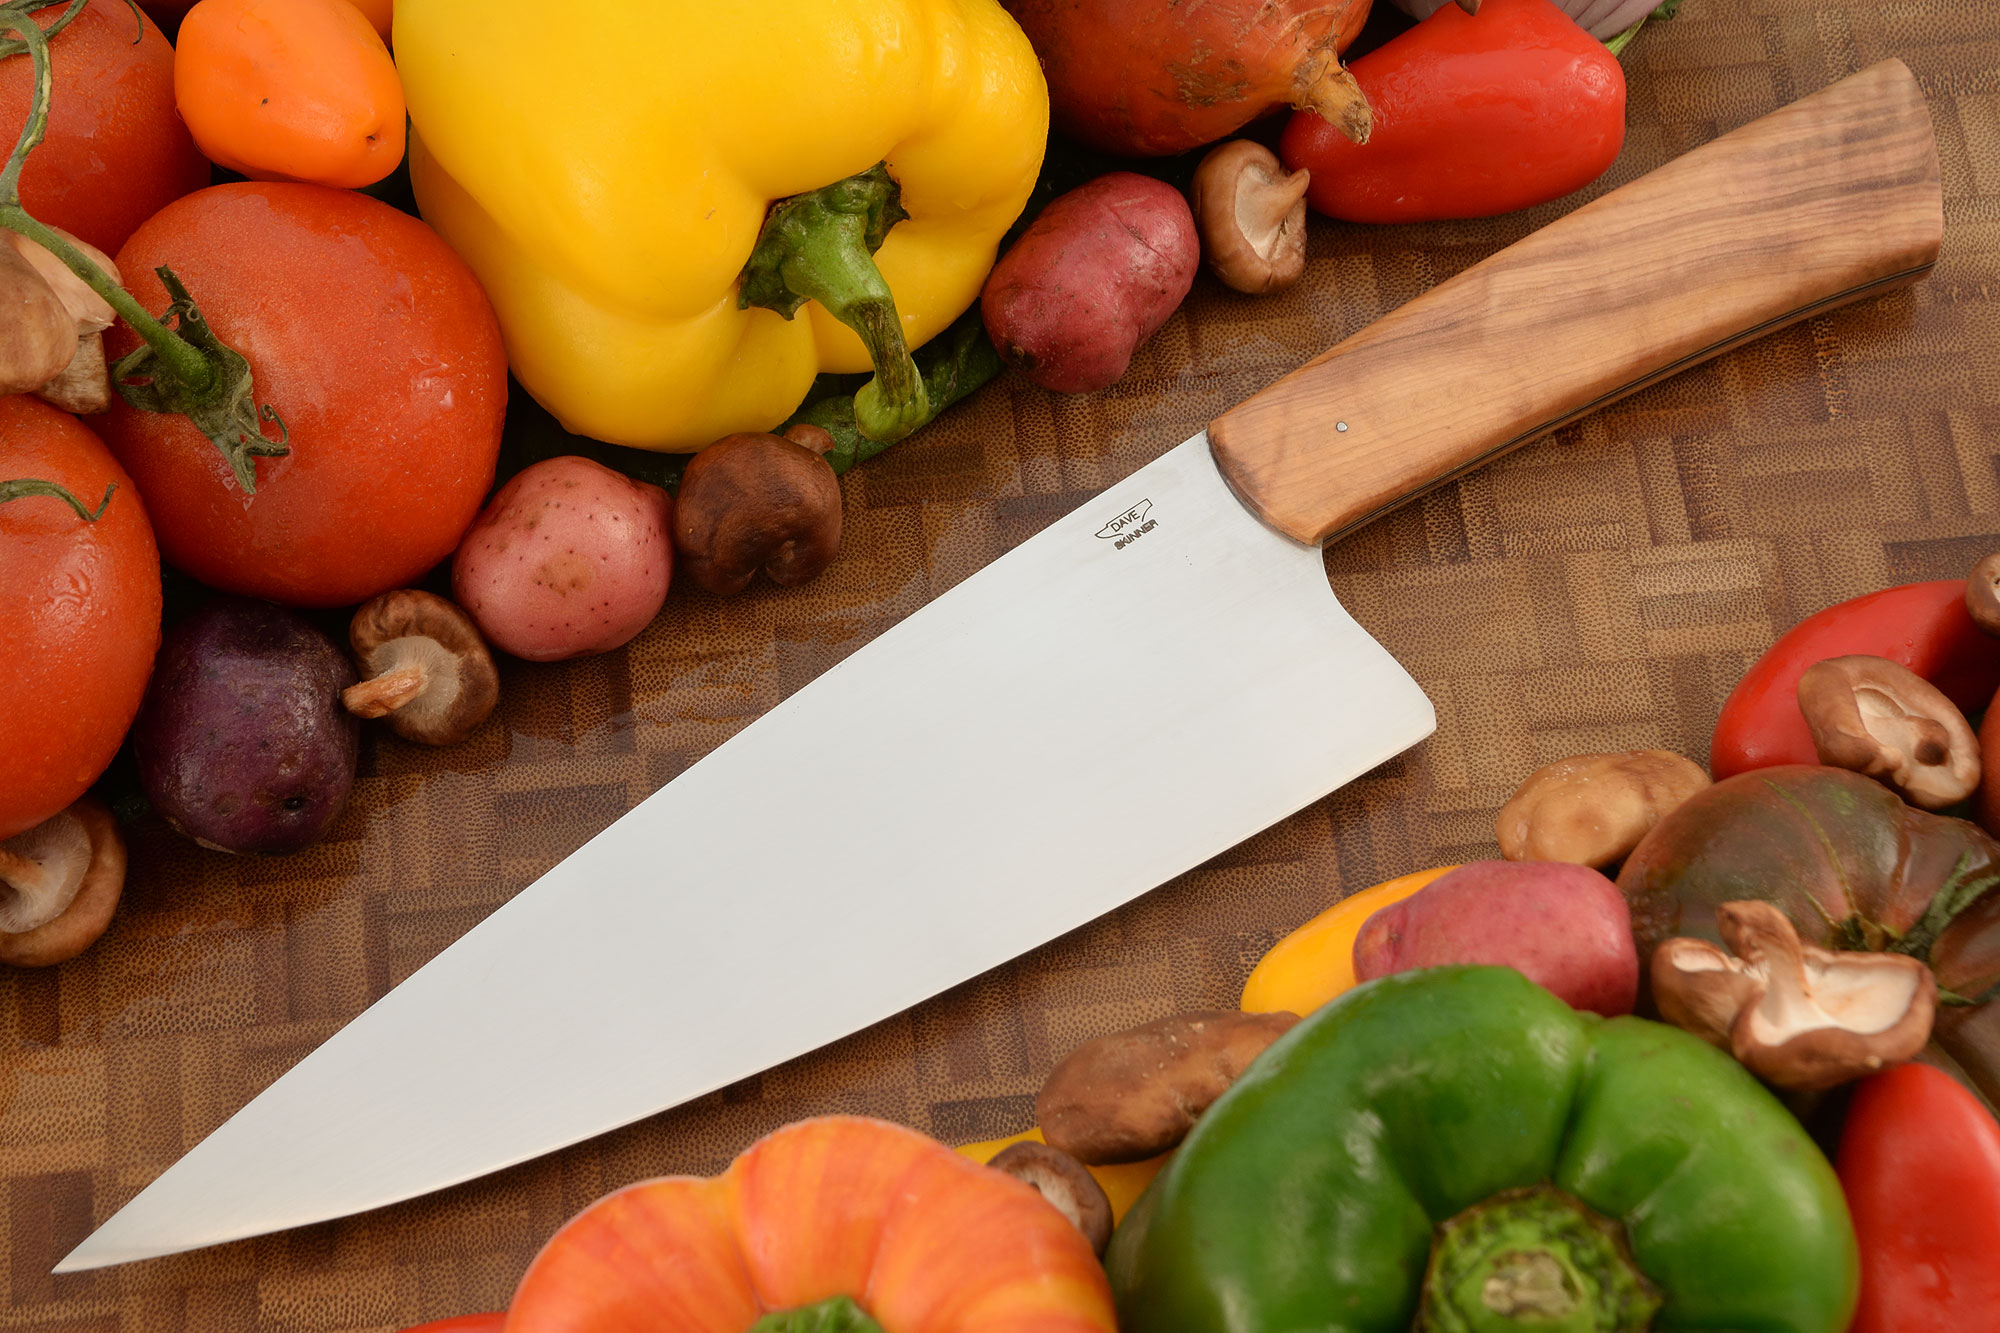 Ultra Sharp Chef Knife, 8 Inch Kitchen Knife with Poultry Shear